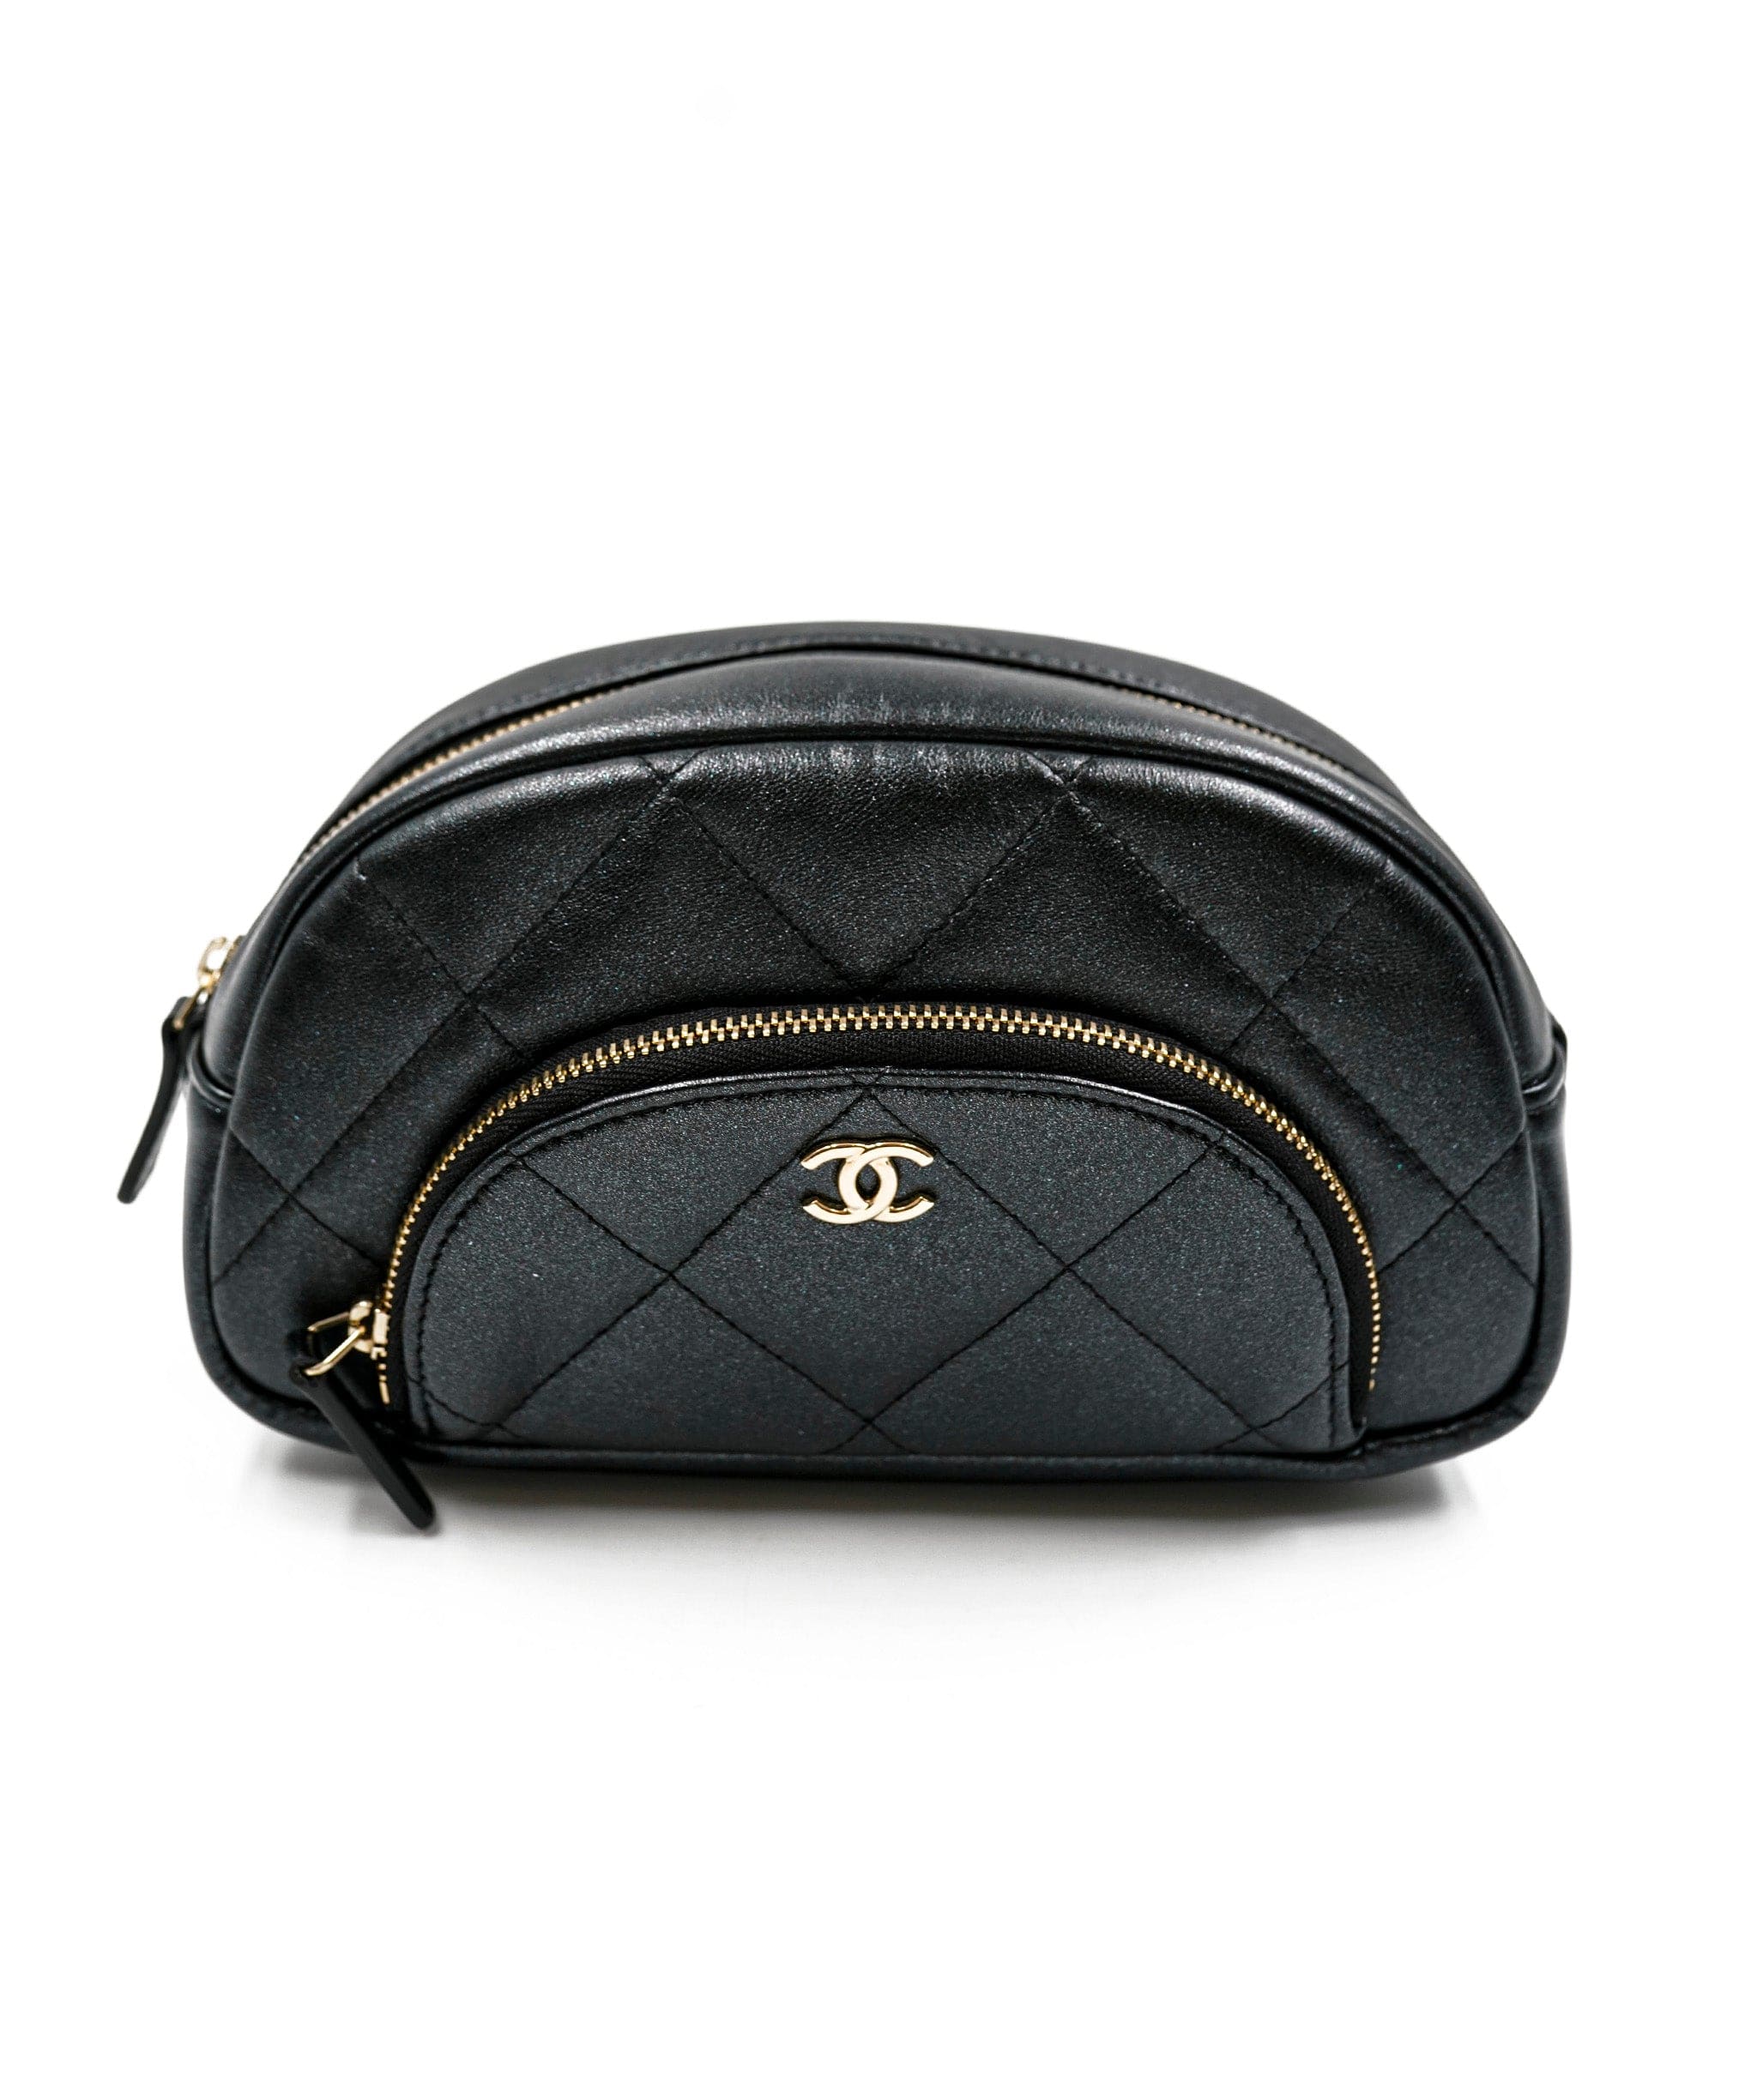 Chanel Chanel Black Iridescent Make Up Pouch ASL5270